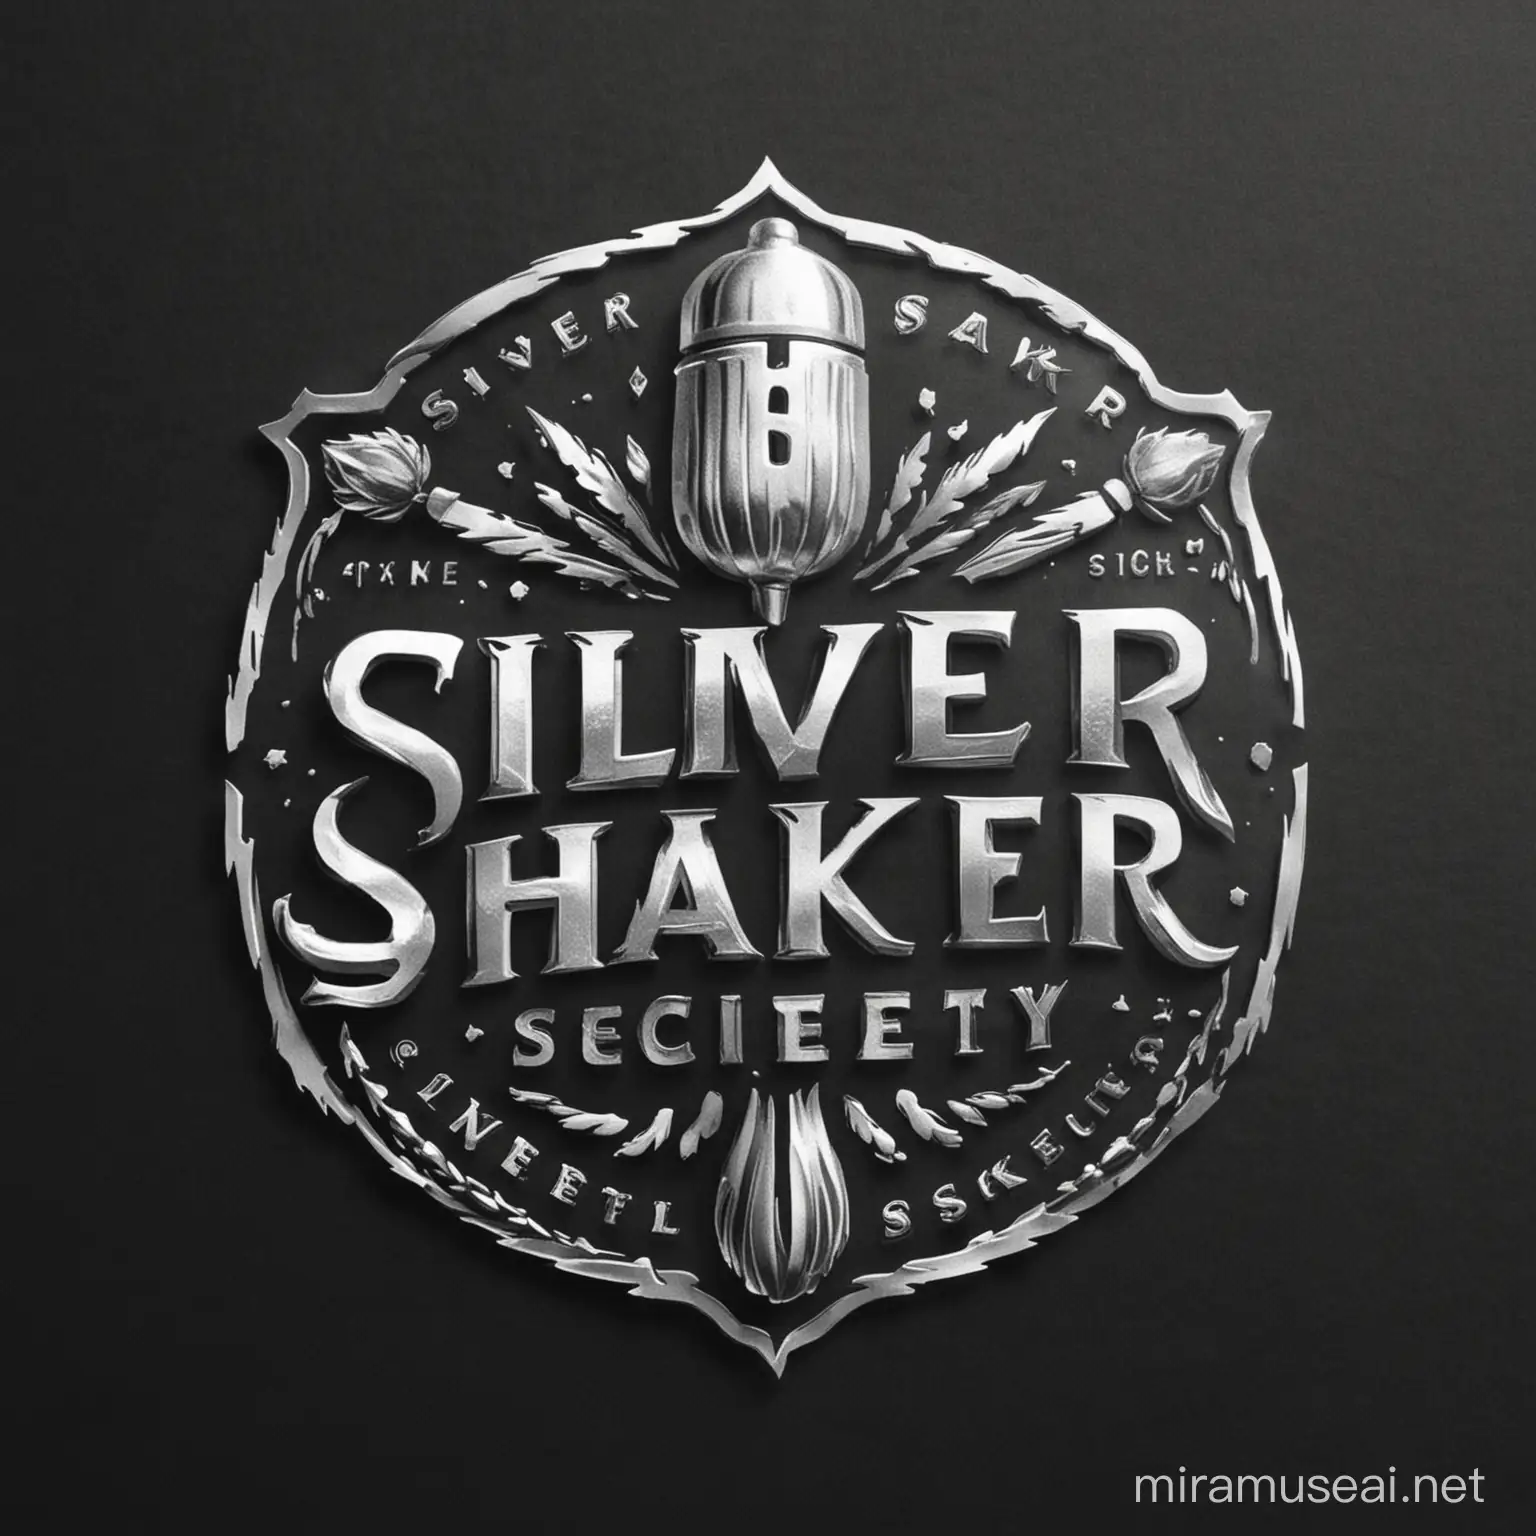 logo for the silver shaker society, which is a craft cocktail product company